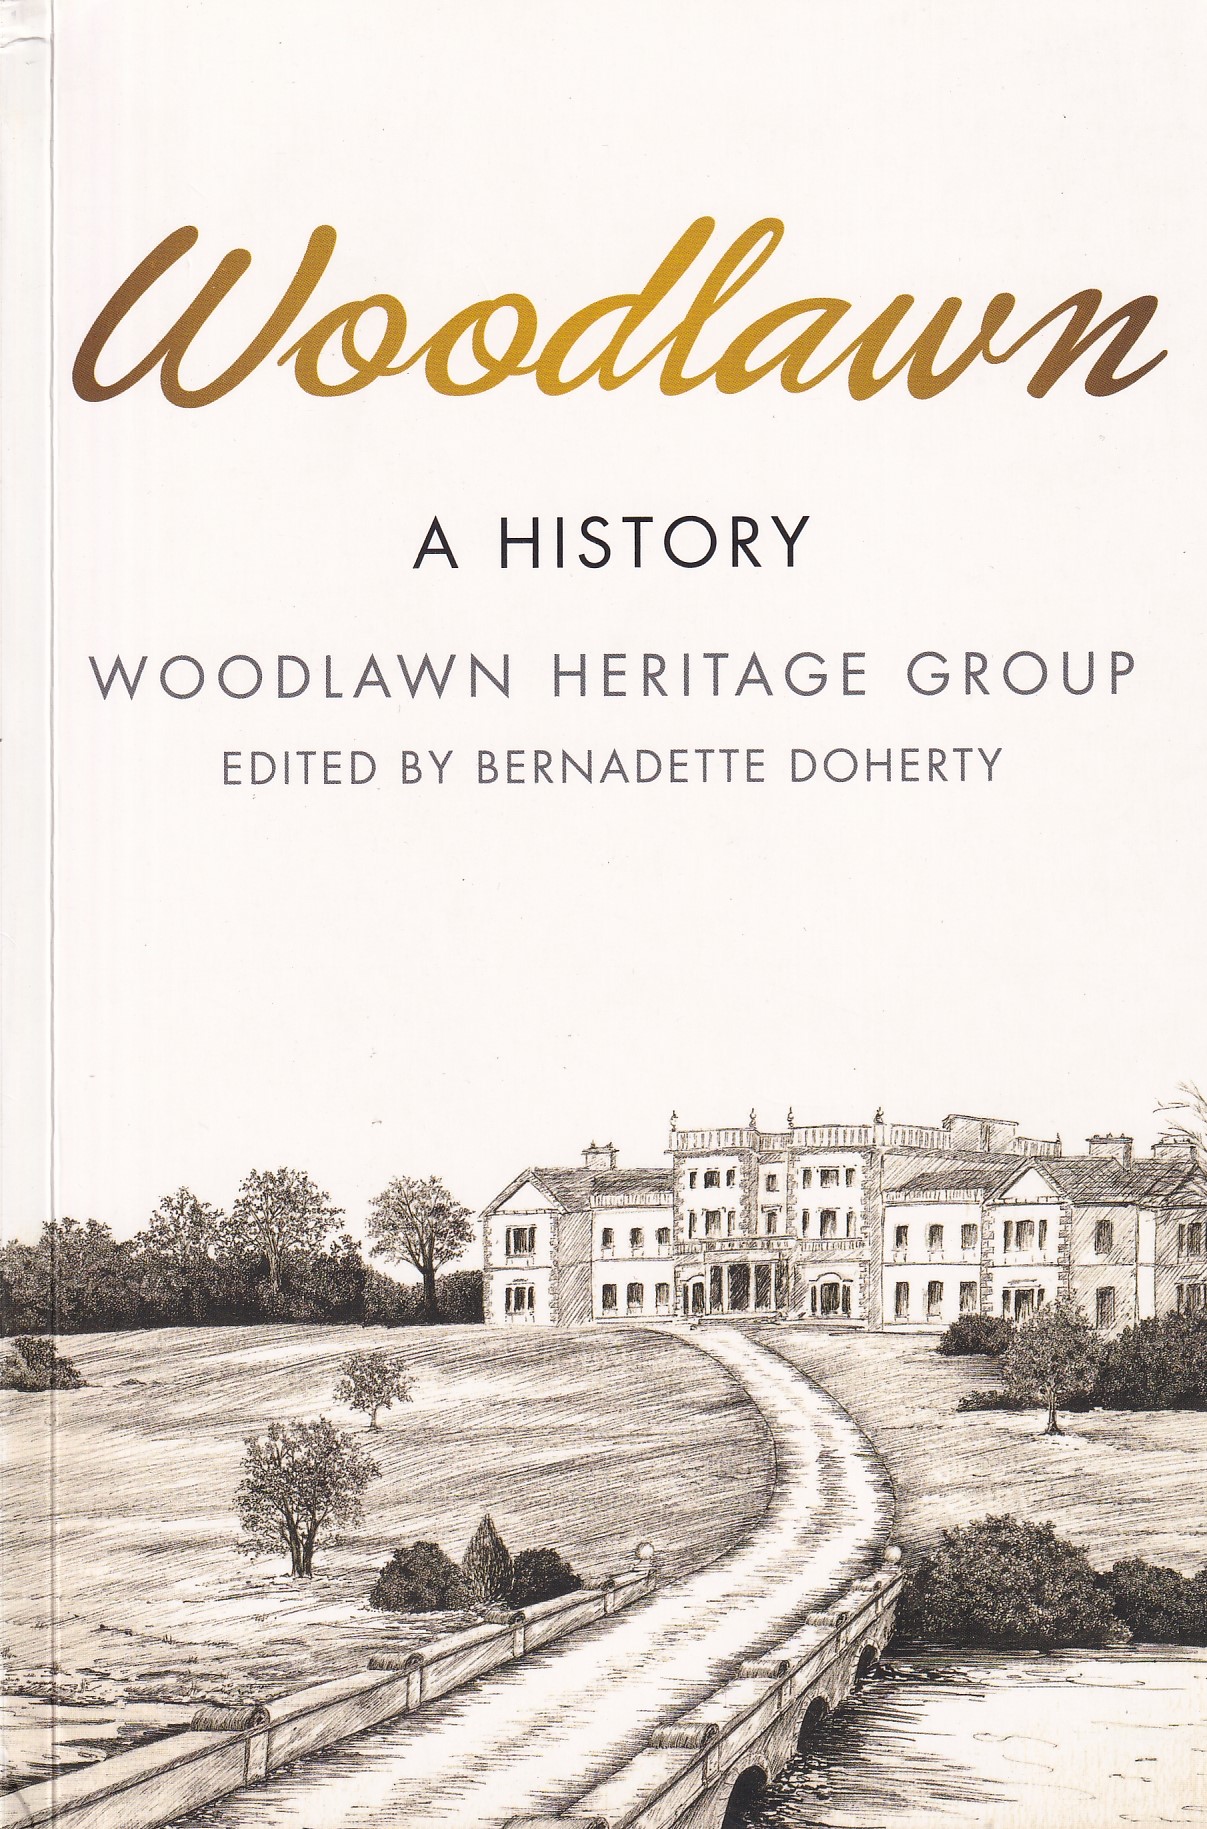 Woodlawn: A History by Woodlawn Heritage Group